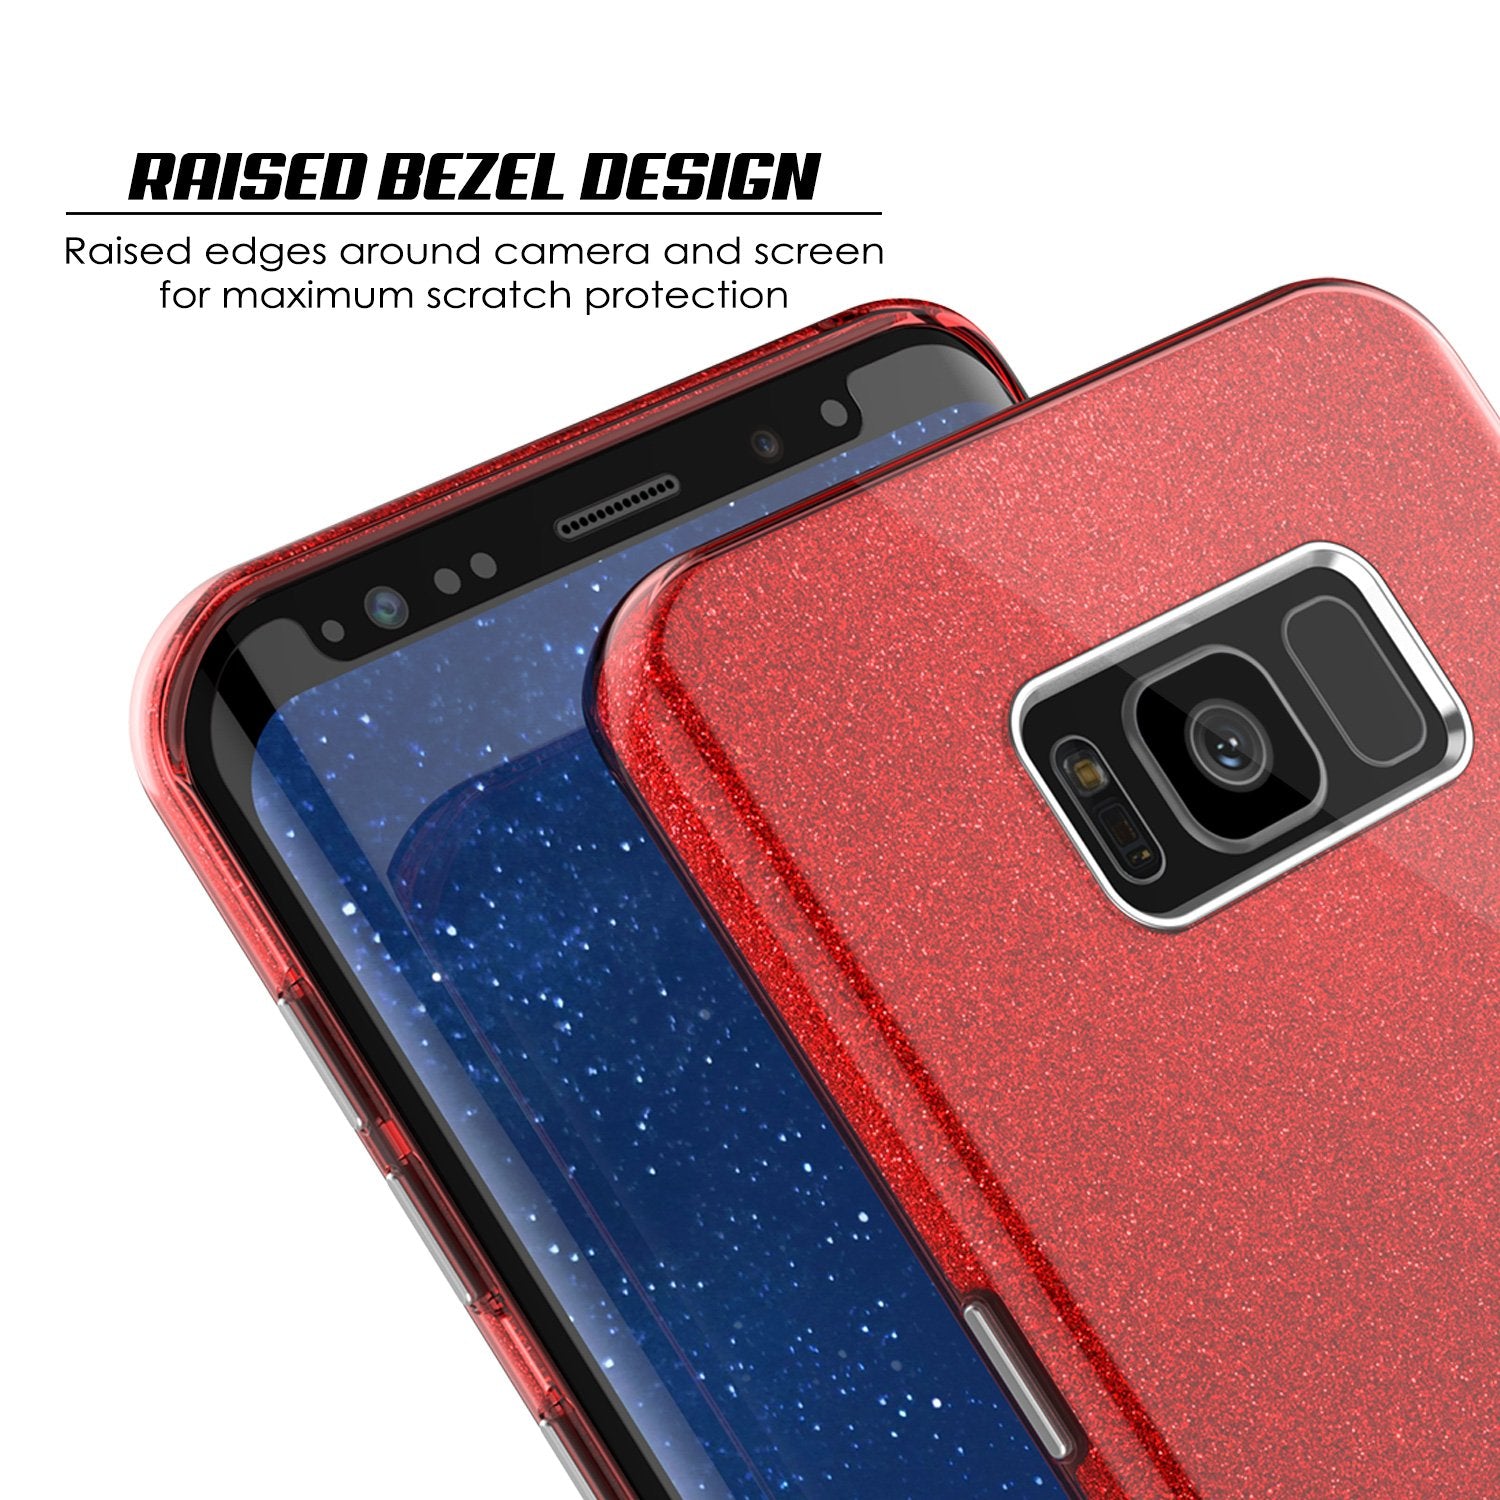 Galaxy S8 Case, Punkcase Galactic 2.0 Series Ultra Slim Protective Armor Cover [Red]